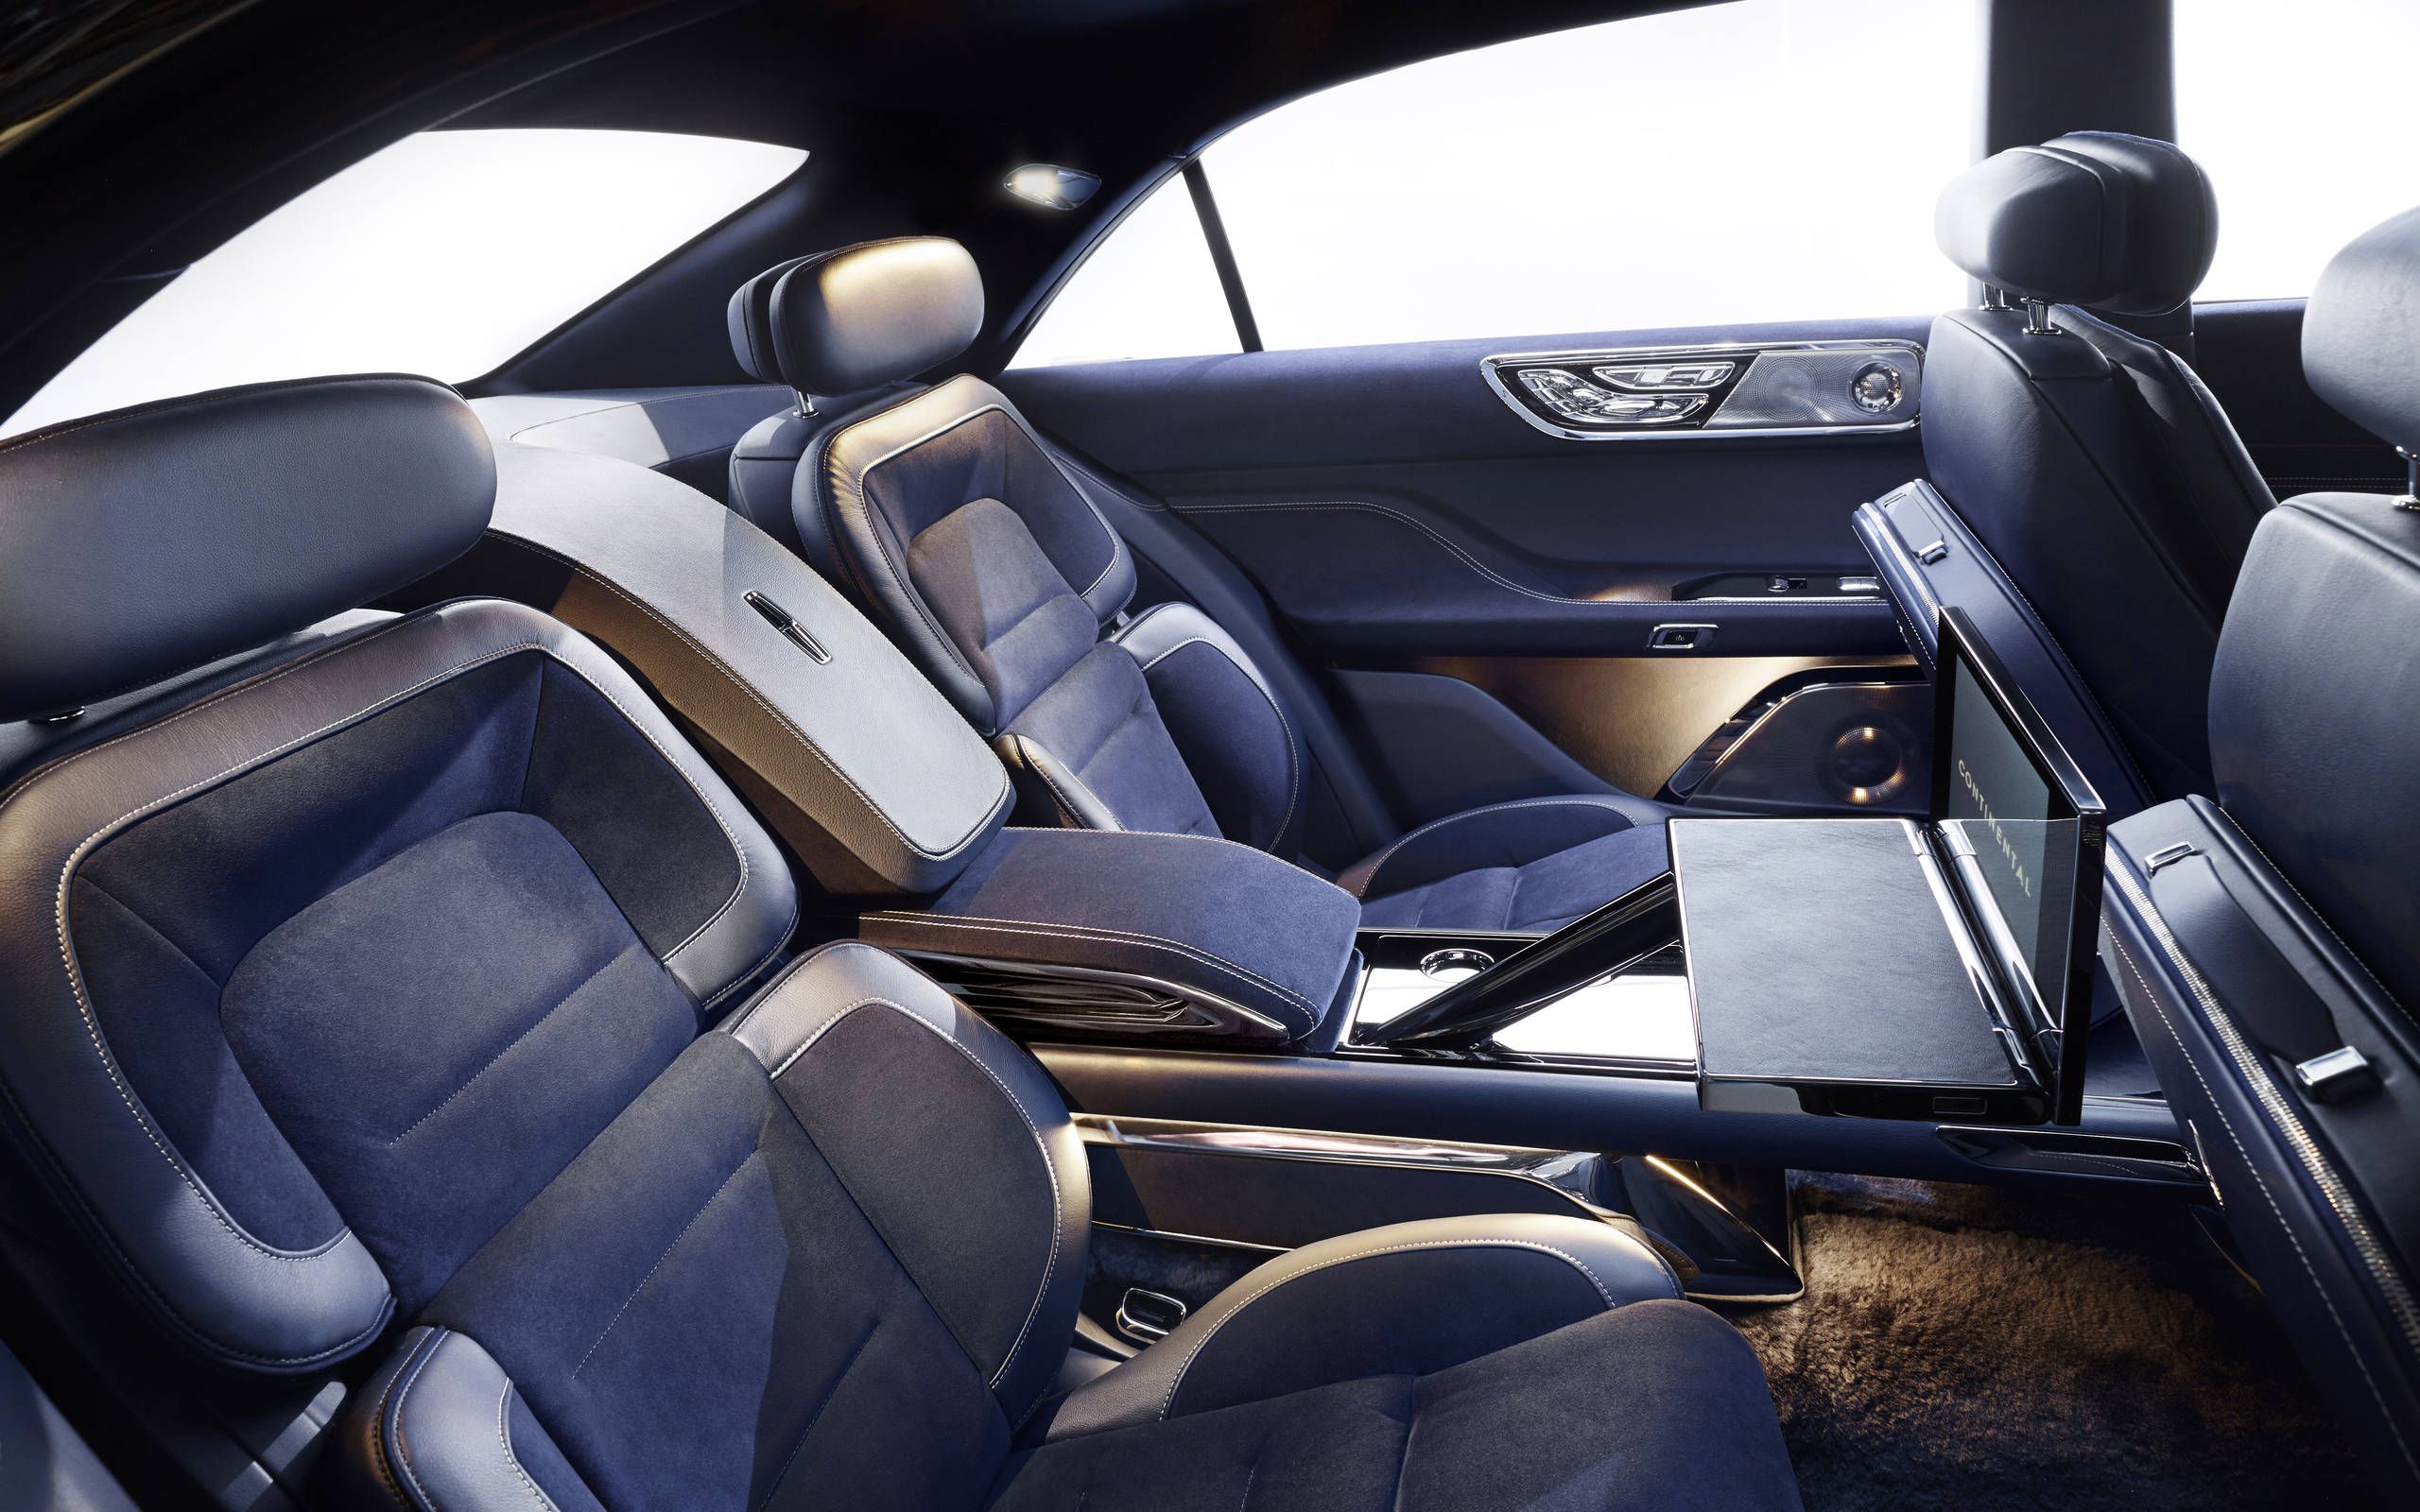 More Lincoln Continental details ahead of New York auto show